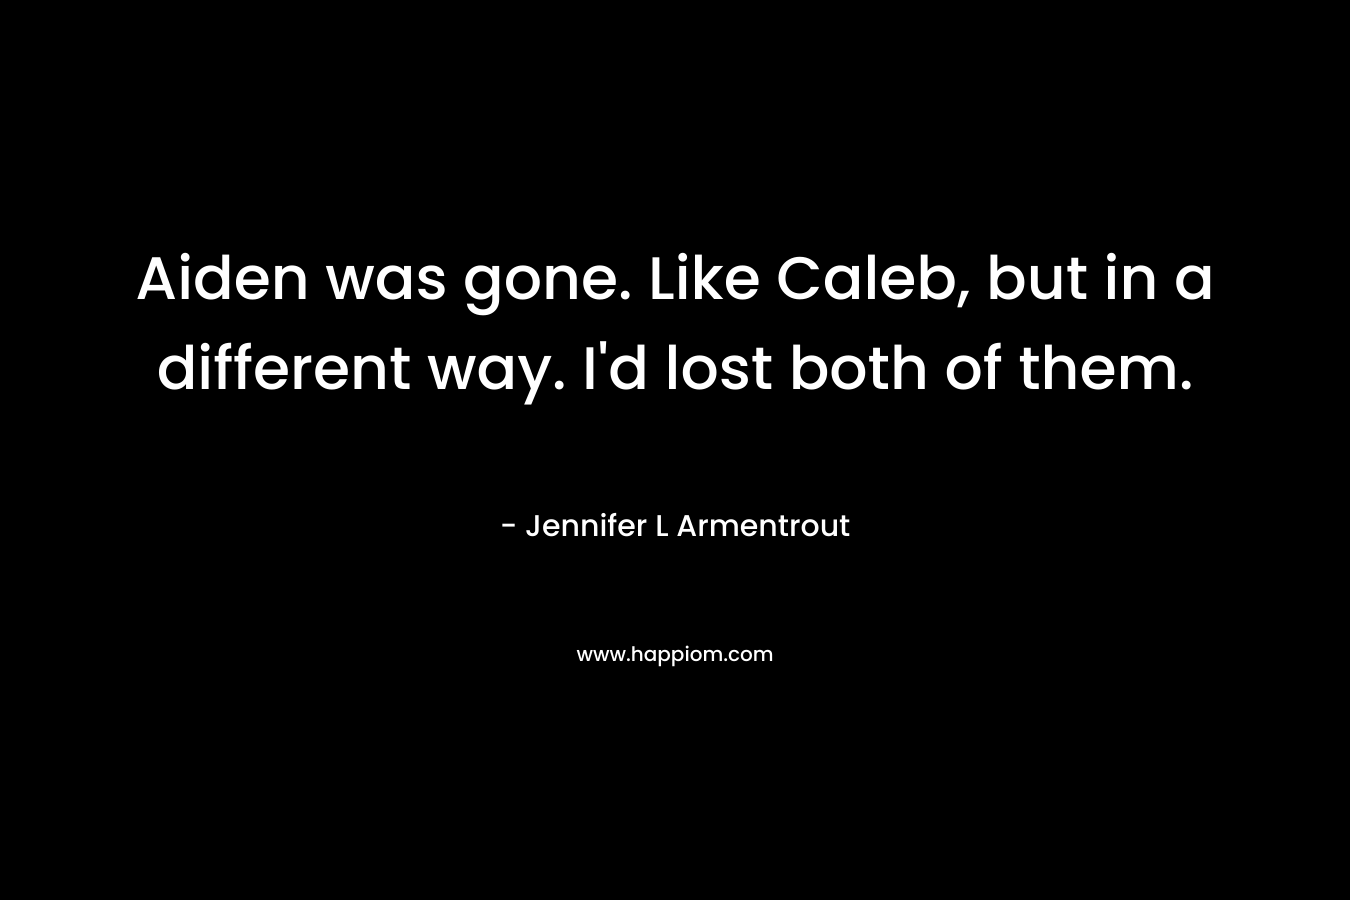 Aiden was gone. Like Caleb, but in a different way. I’d lost both of them. – Jennifer L Armentrout